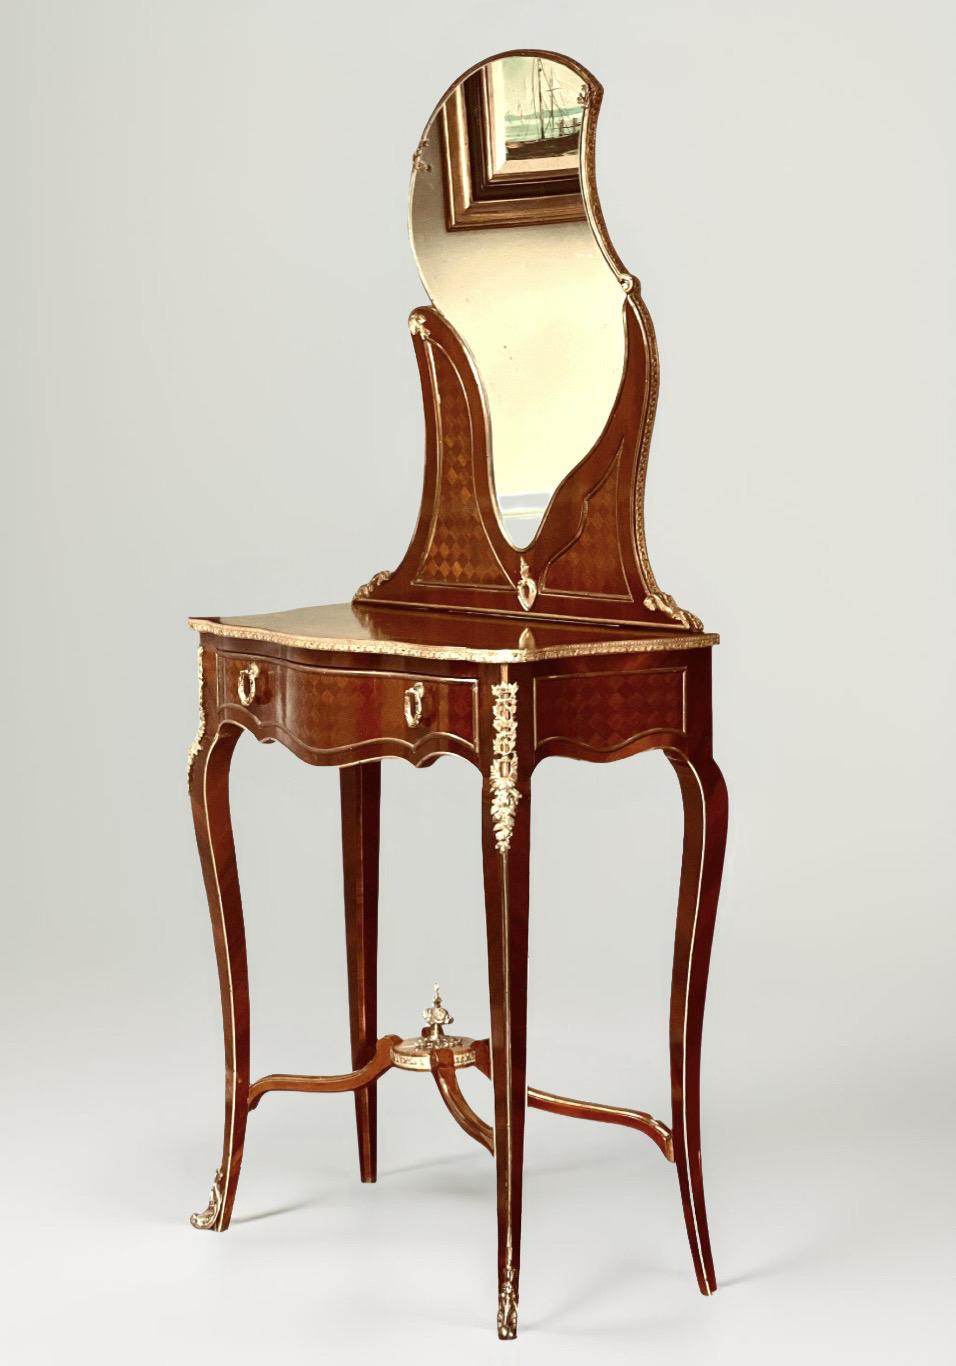 French Ormolu-Mounted Kingwood and Parquetry Vanity Dressing Table In Good Condition For Sale In Doylestown, PA